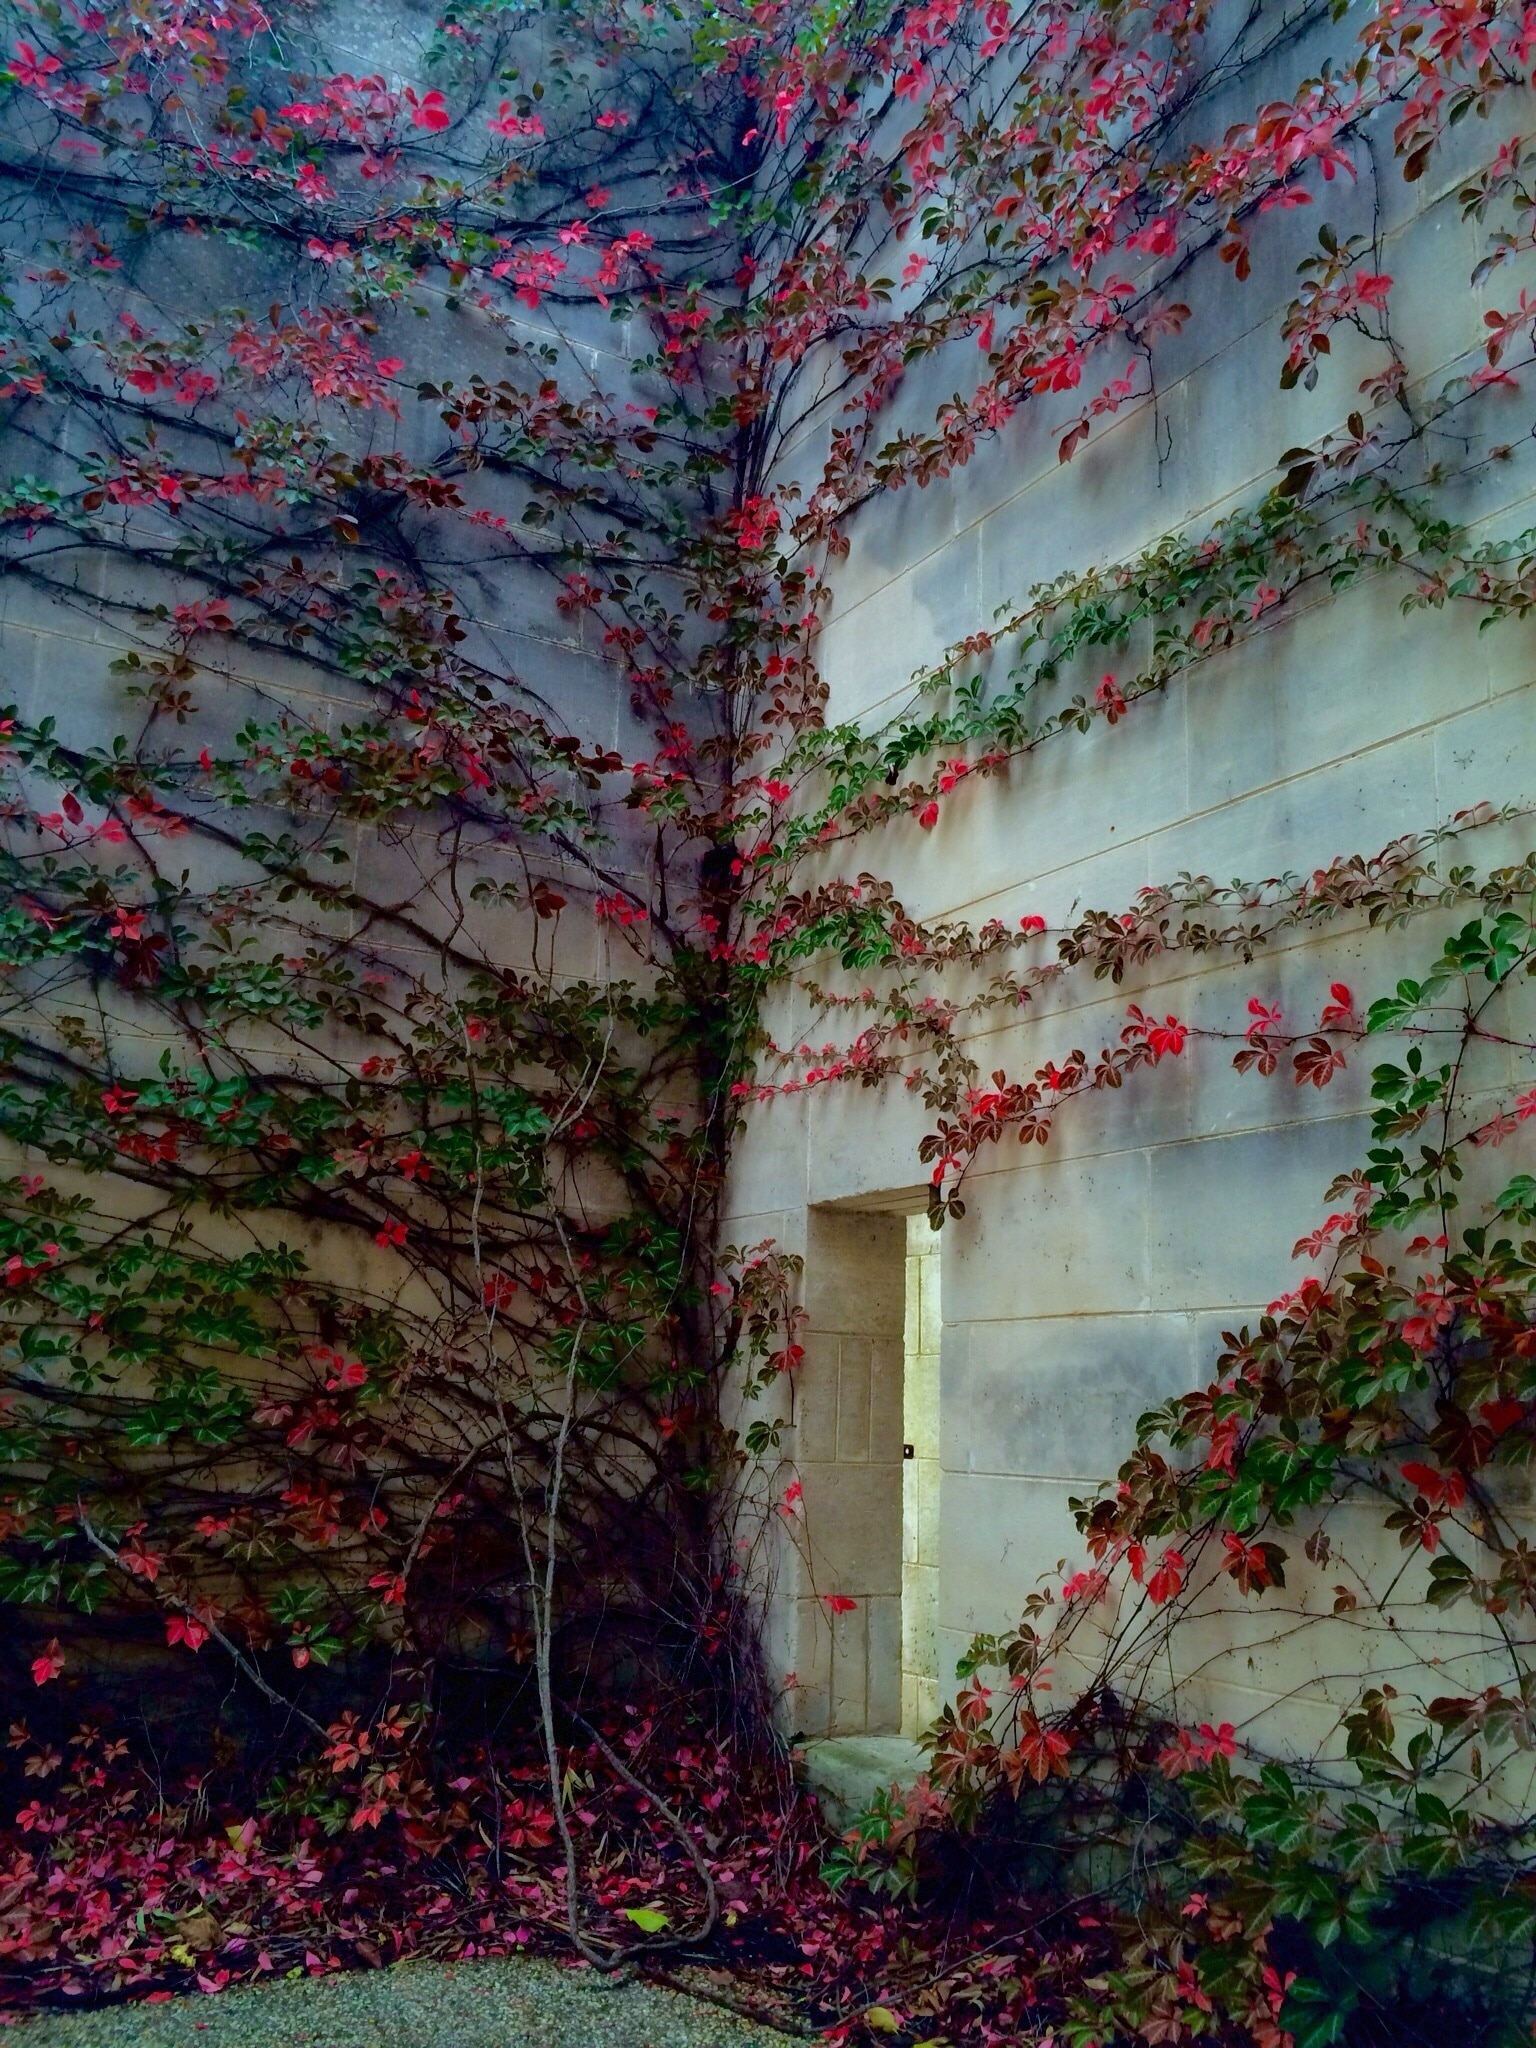 "Courtyard Detail" on Mother's Day 2015 at the #Heide Museum of Modern Art in Bulleen, near #Melbourne, Australia.  
Heide offers three galleries, stunning architecture and fifteen acres of gardens and sculpture park near the Yarra River. 
The autumnal colours of this creeper against the limestone caught my eye today!  
#iPhoneonly with some tone adjustment!
#BestOf5